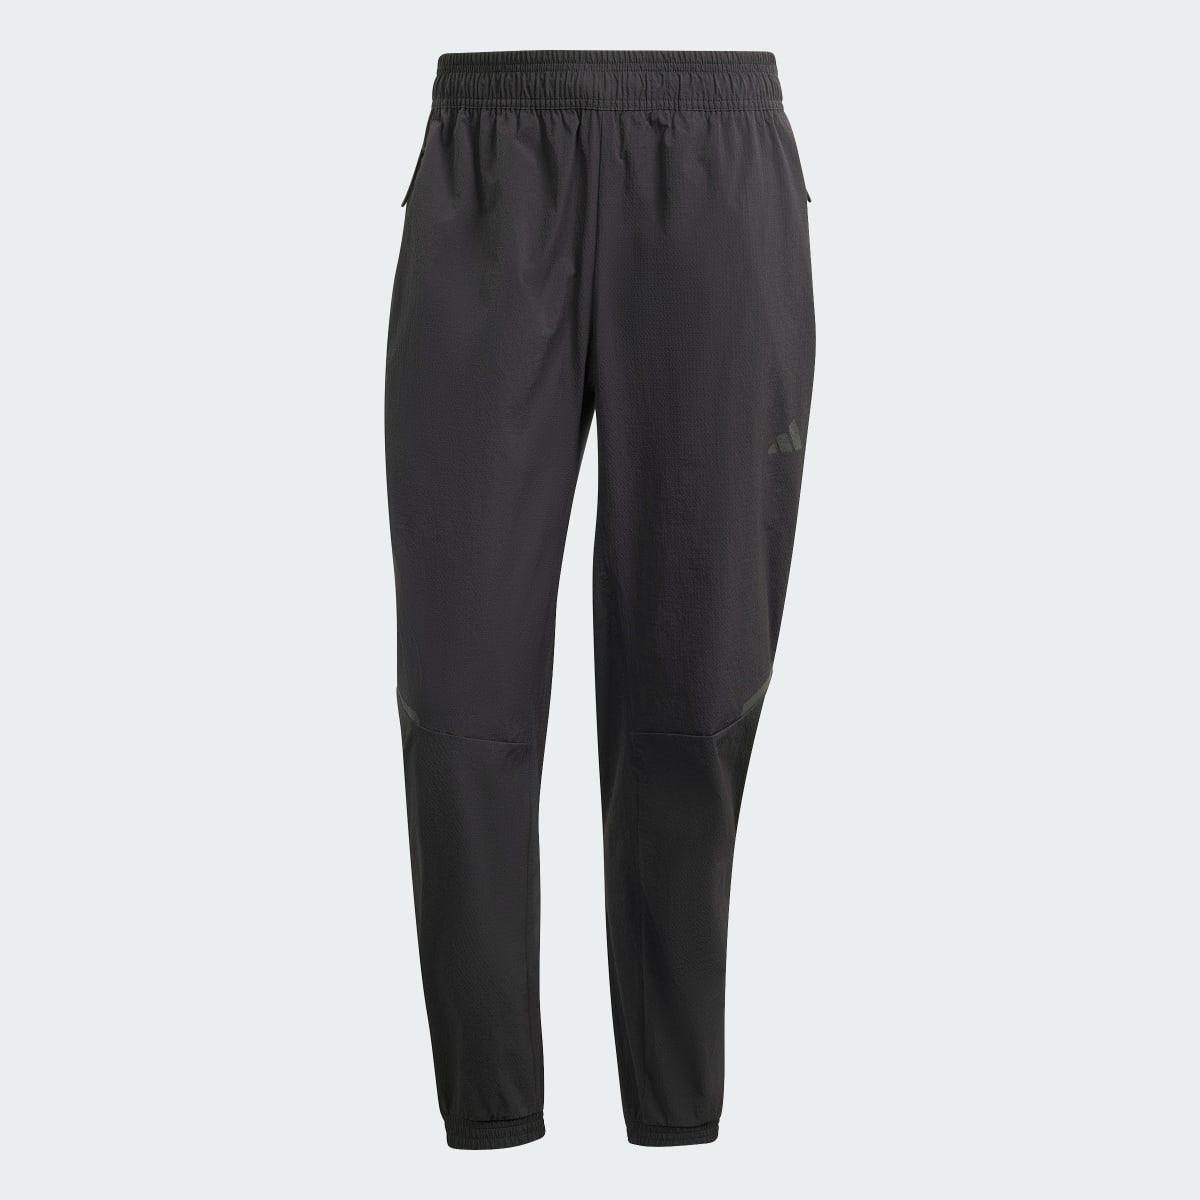 Adidas Designed for Training Workout Pants. 4